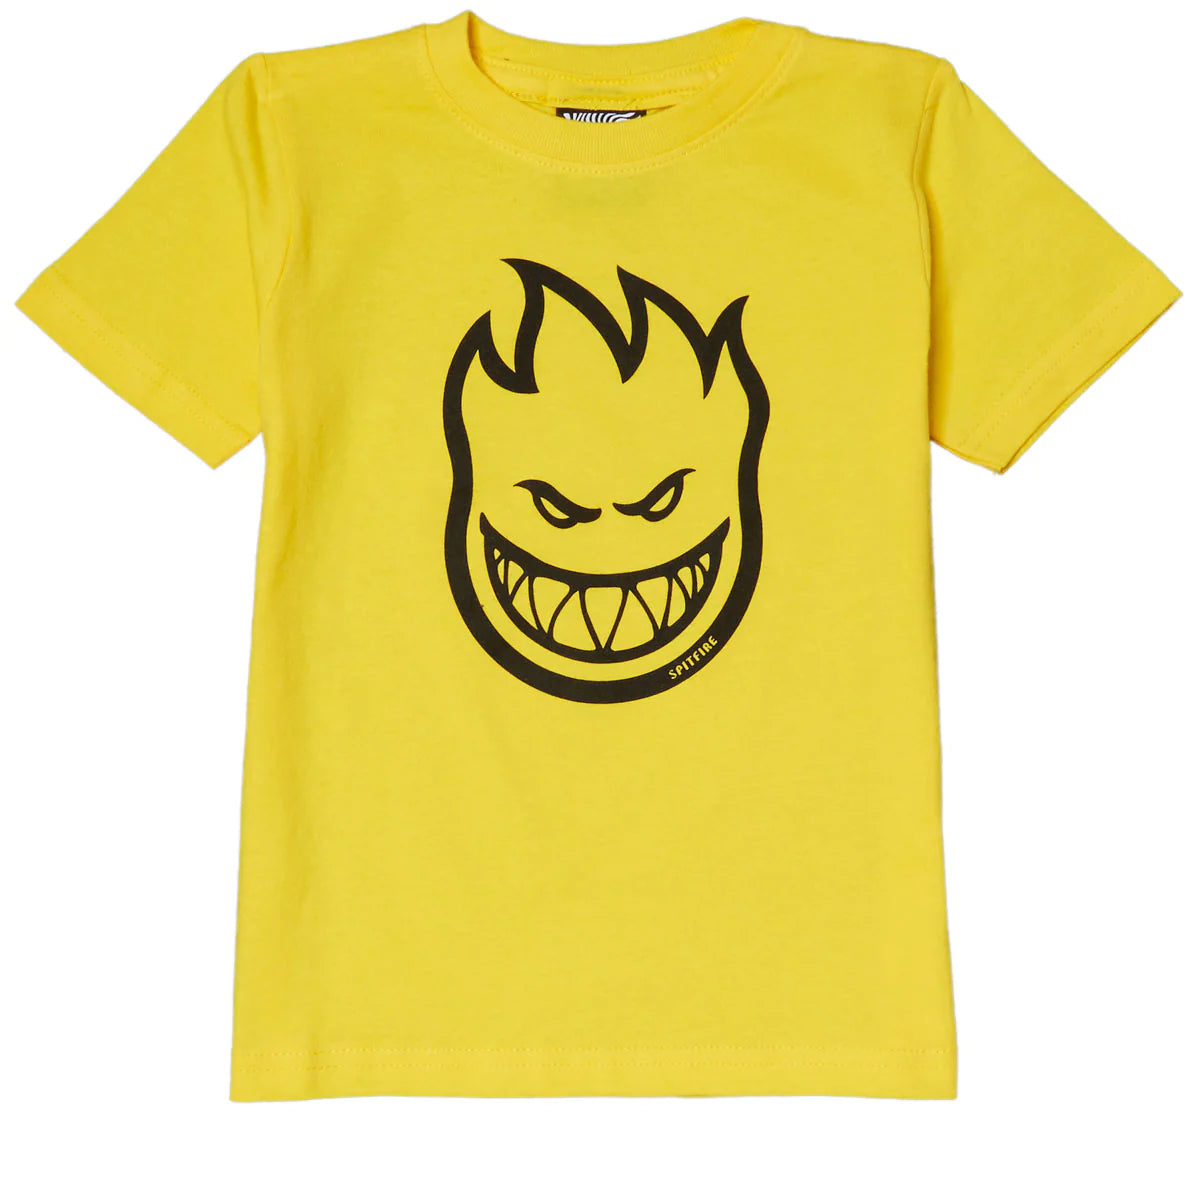 Toddler S/S Shirt Bighead GLD/BLK (size options listed)